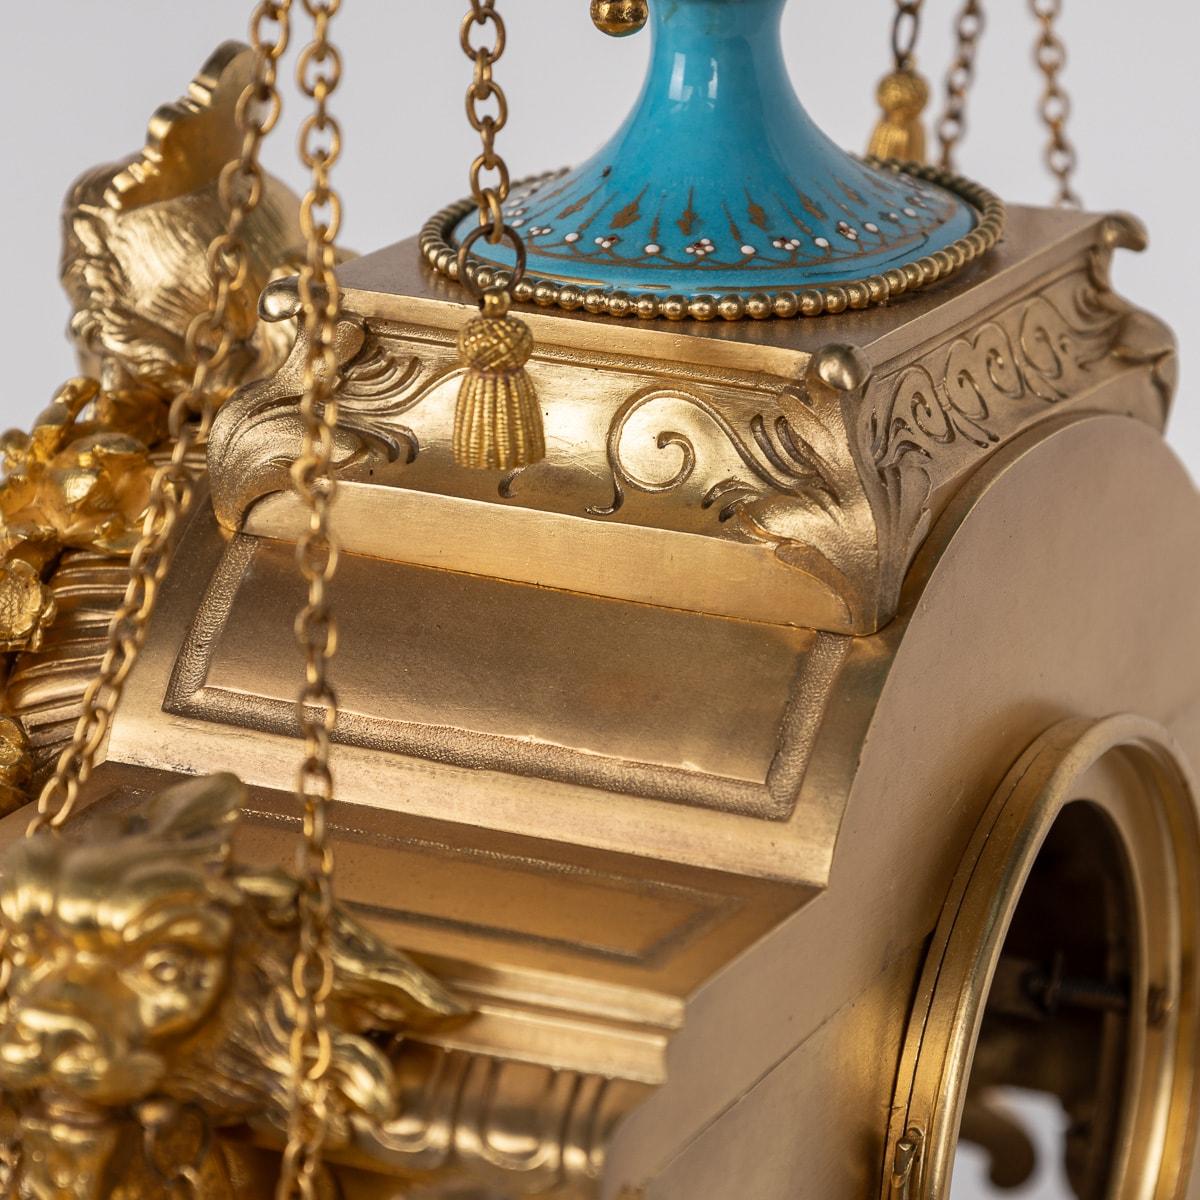 19th Century French Ormolu Mounted Sevres Style Porcelain Mantle Clock c.1870 For Sale 7